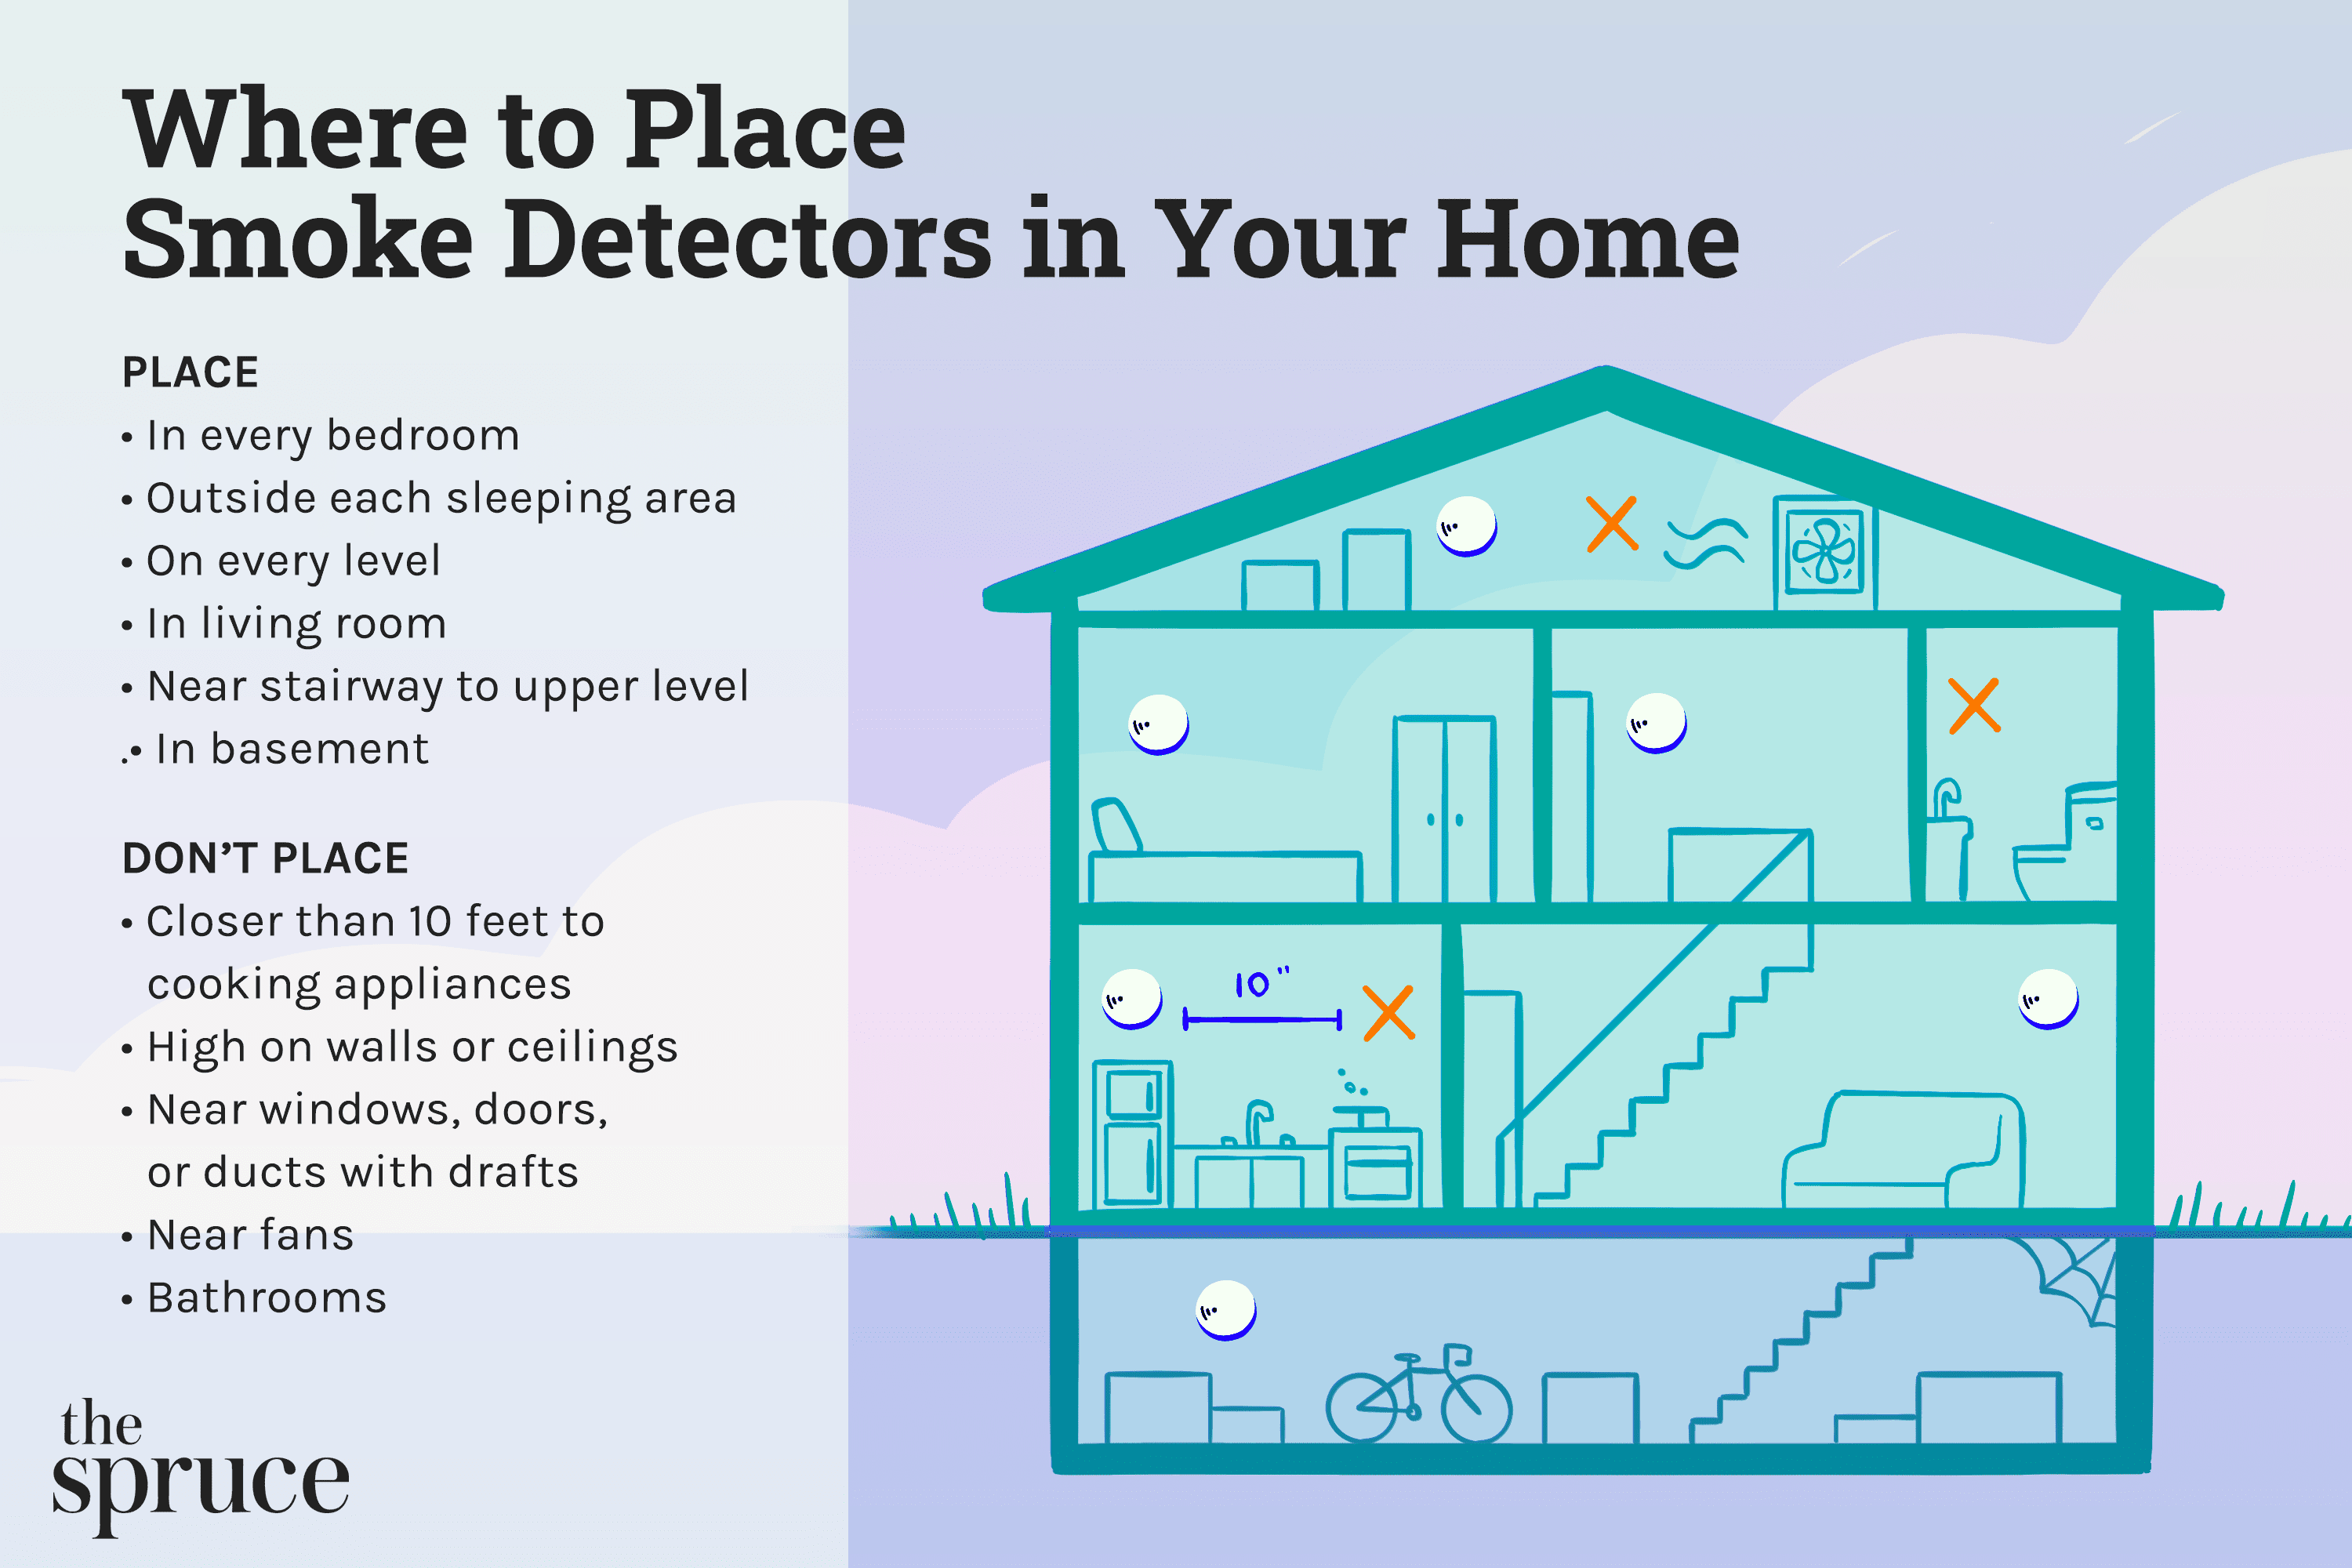 Where to Place the Smoke Detectors in Your Home